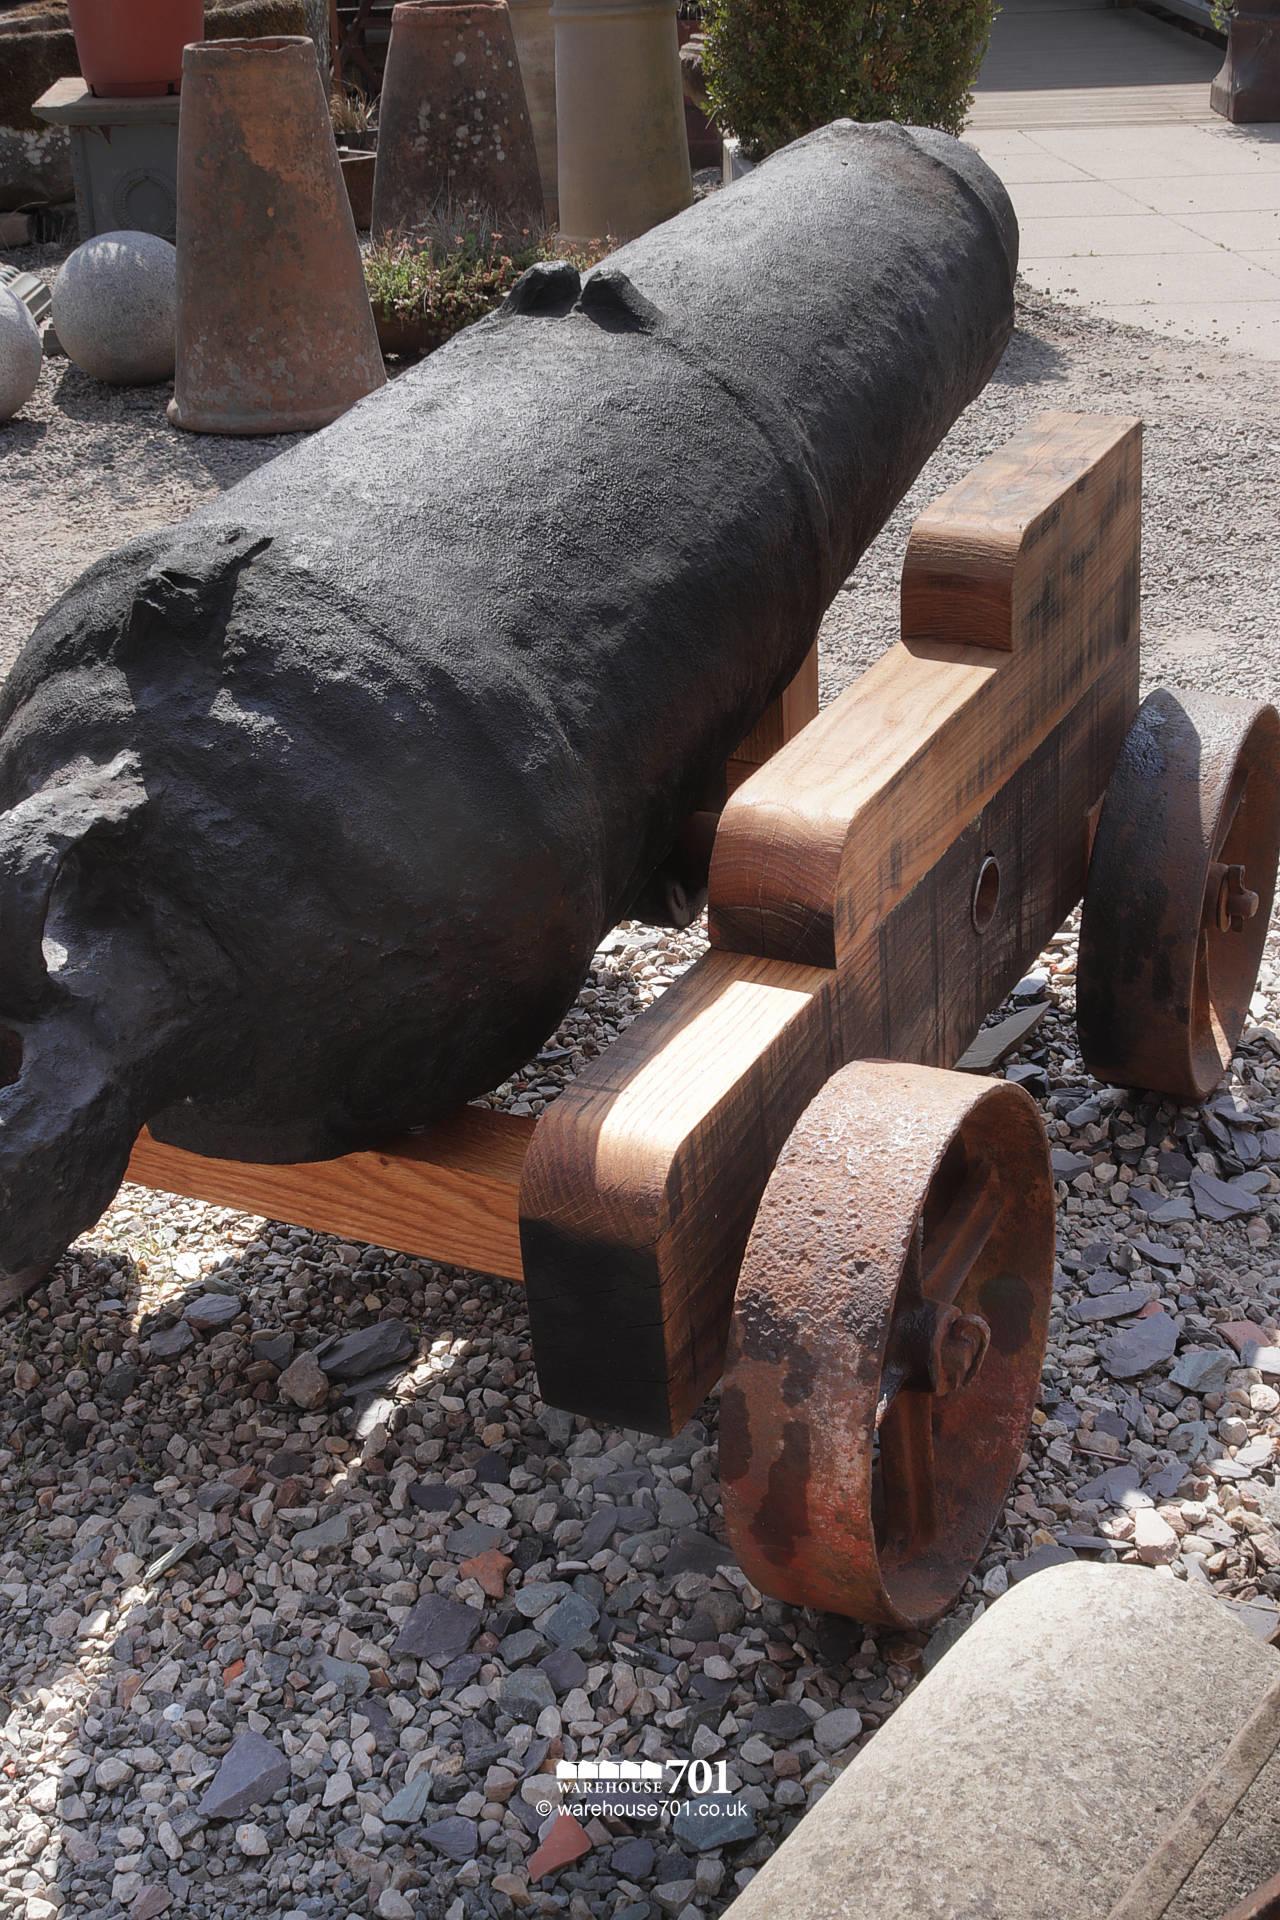 Fabulous Large Ocean-Salvaged Maritime 69lb Carronade Cannon on Carriage #6